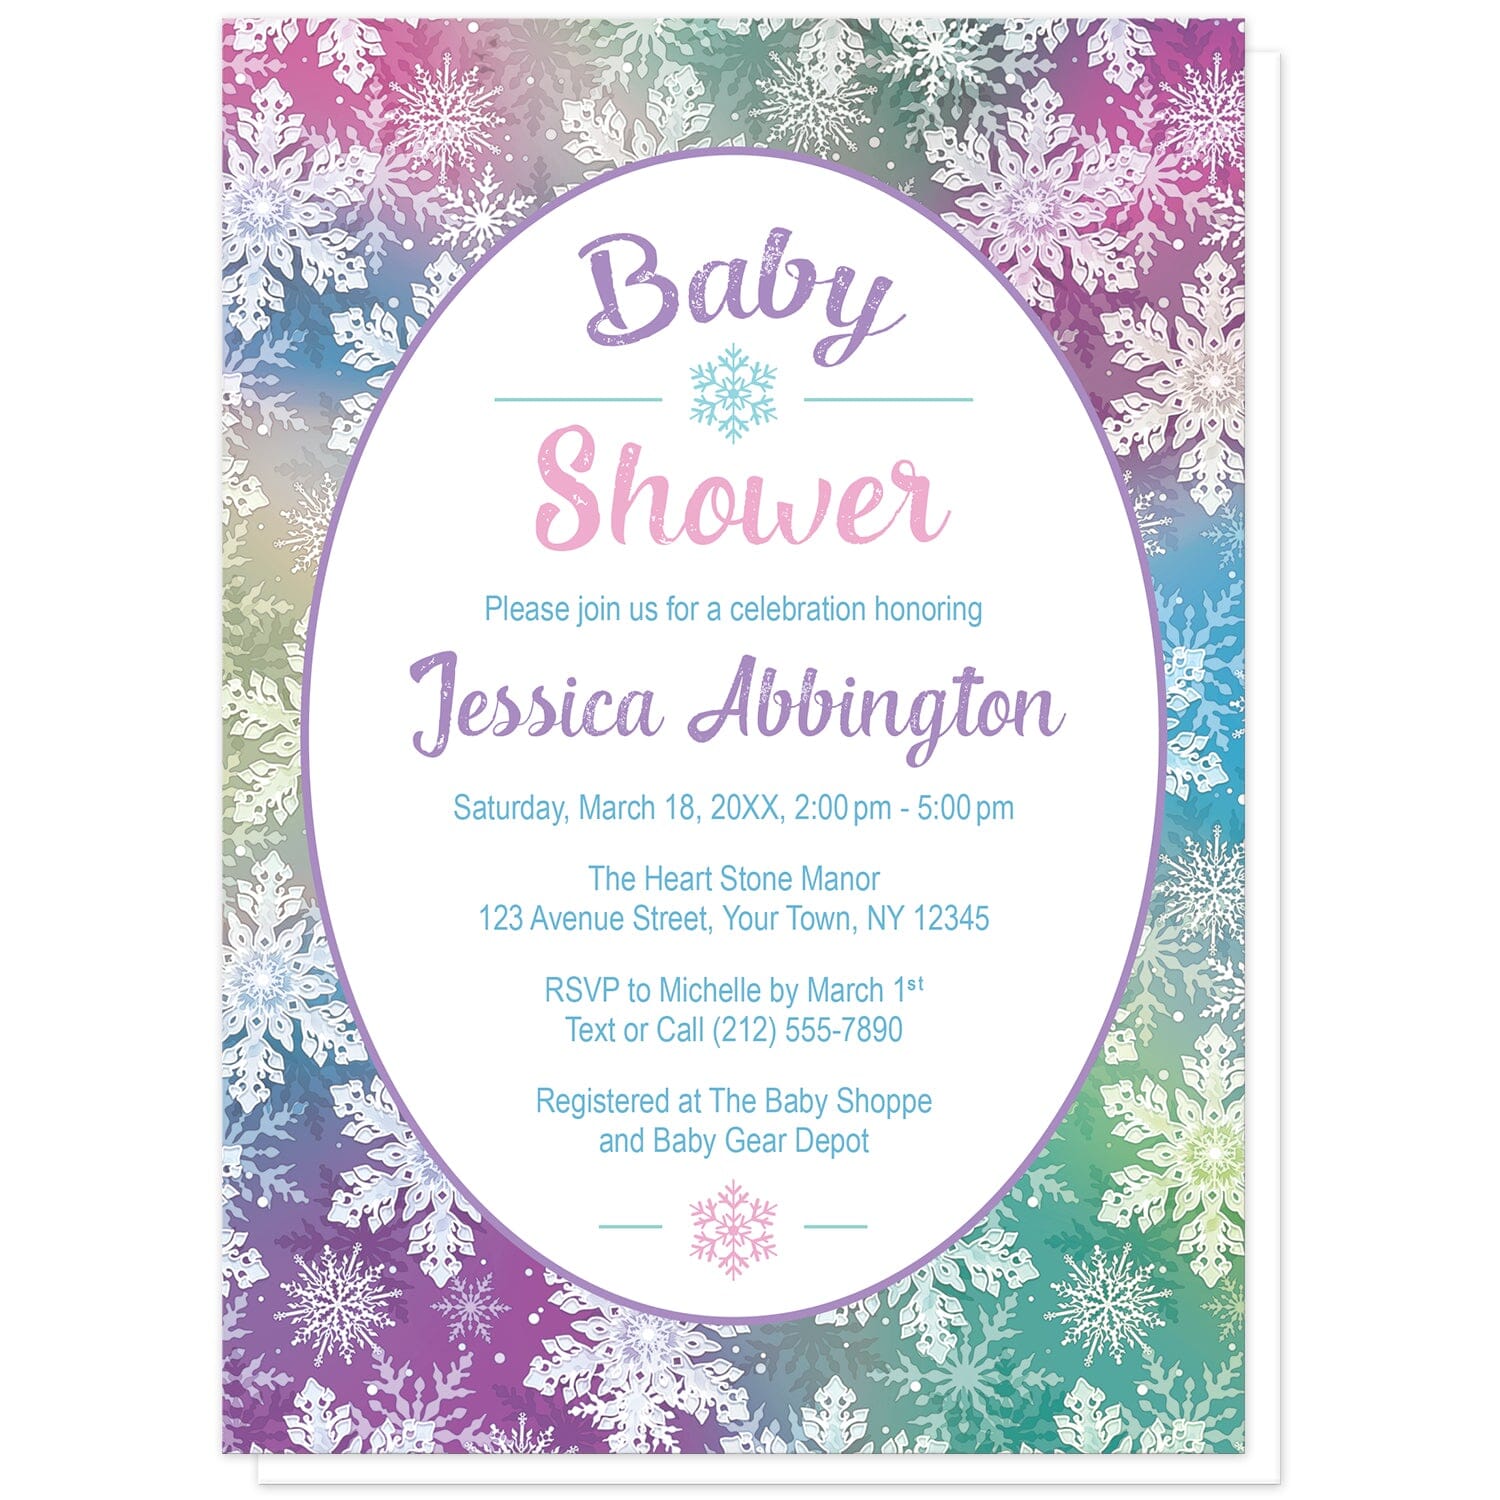 Rainbow Snowflake Baby Shower Invitations at Artistically Invited. Pretty rainbow snowflake baby shower invitations designed with your personalized baby shower details custom printed in colorful text in a white oval frame design over a beautiful and ornate rainbow snowflake pattern with white snowflakes over a multicolored background.